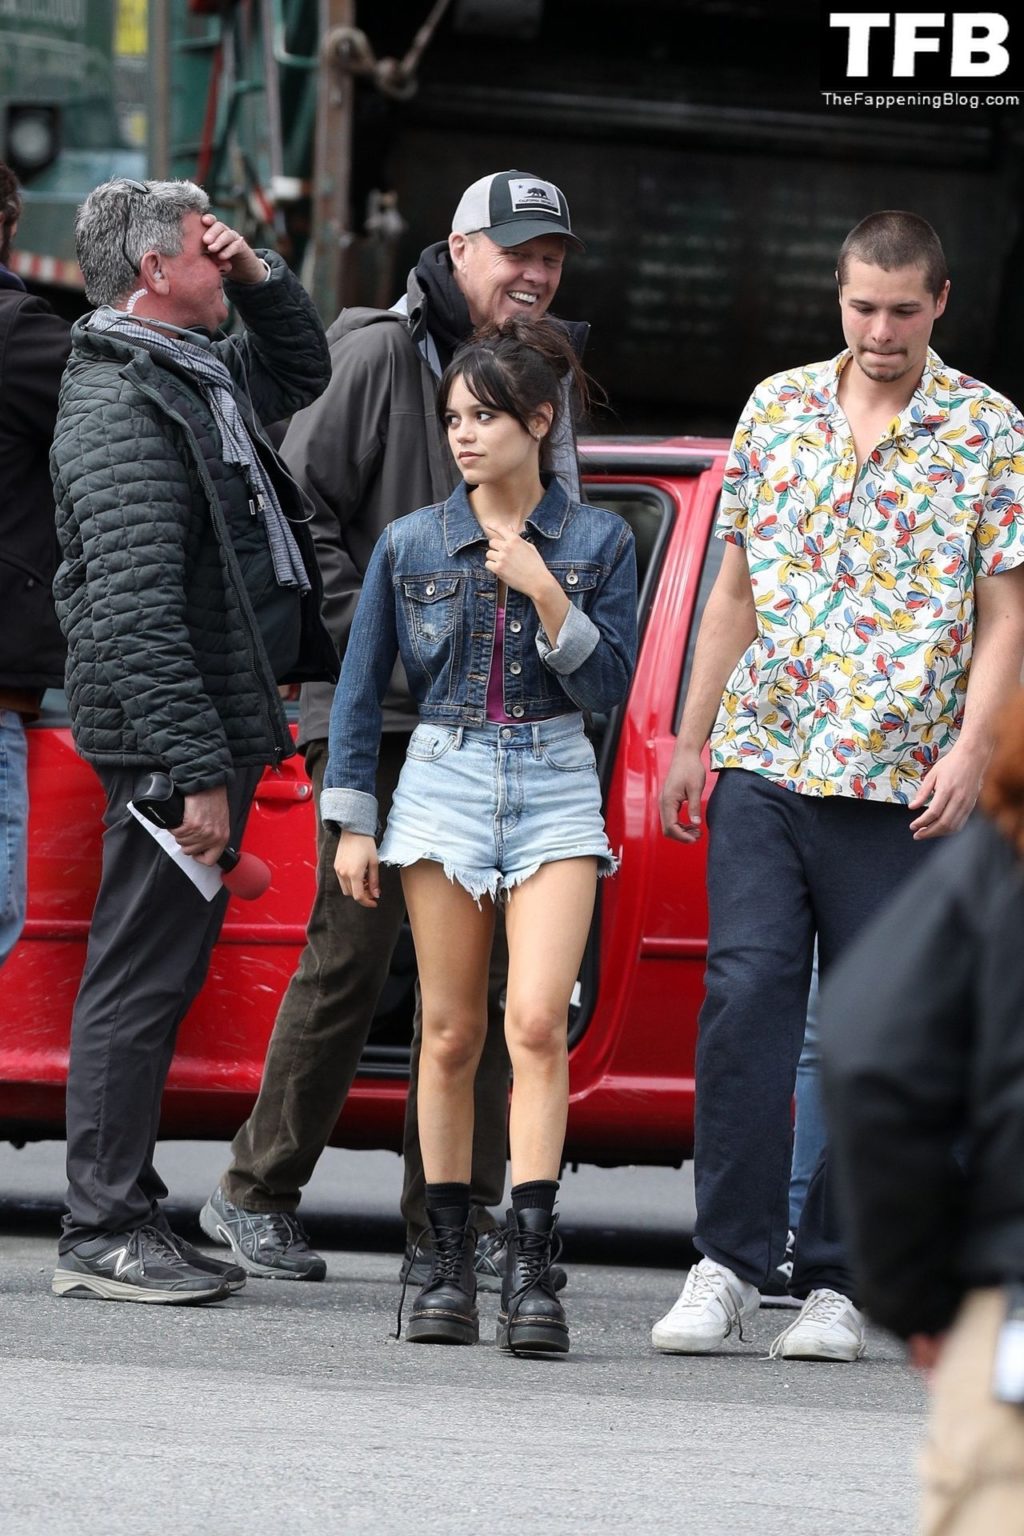 Jenna Ortega Sexy The Fappening Blog 8 1024x1536 - Leggy Jenna Ortega is Spotted in Short Shorts on the Set of “Finest Kind” (24 Photos)